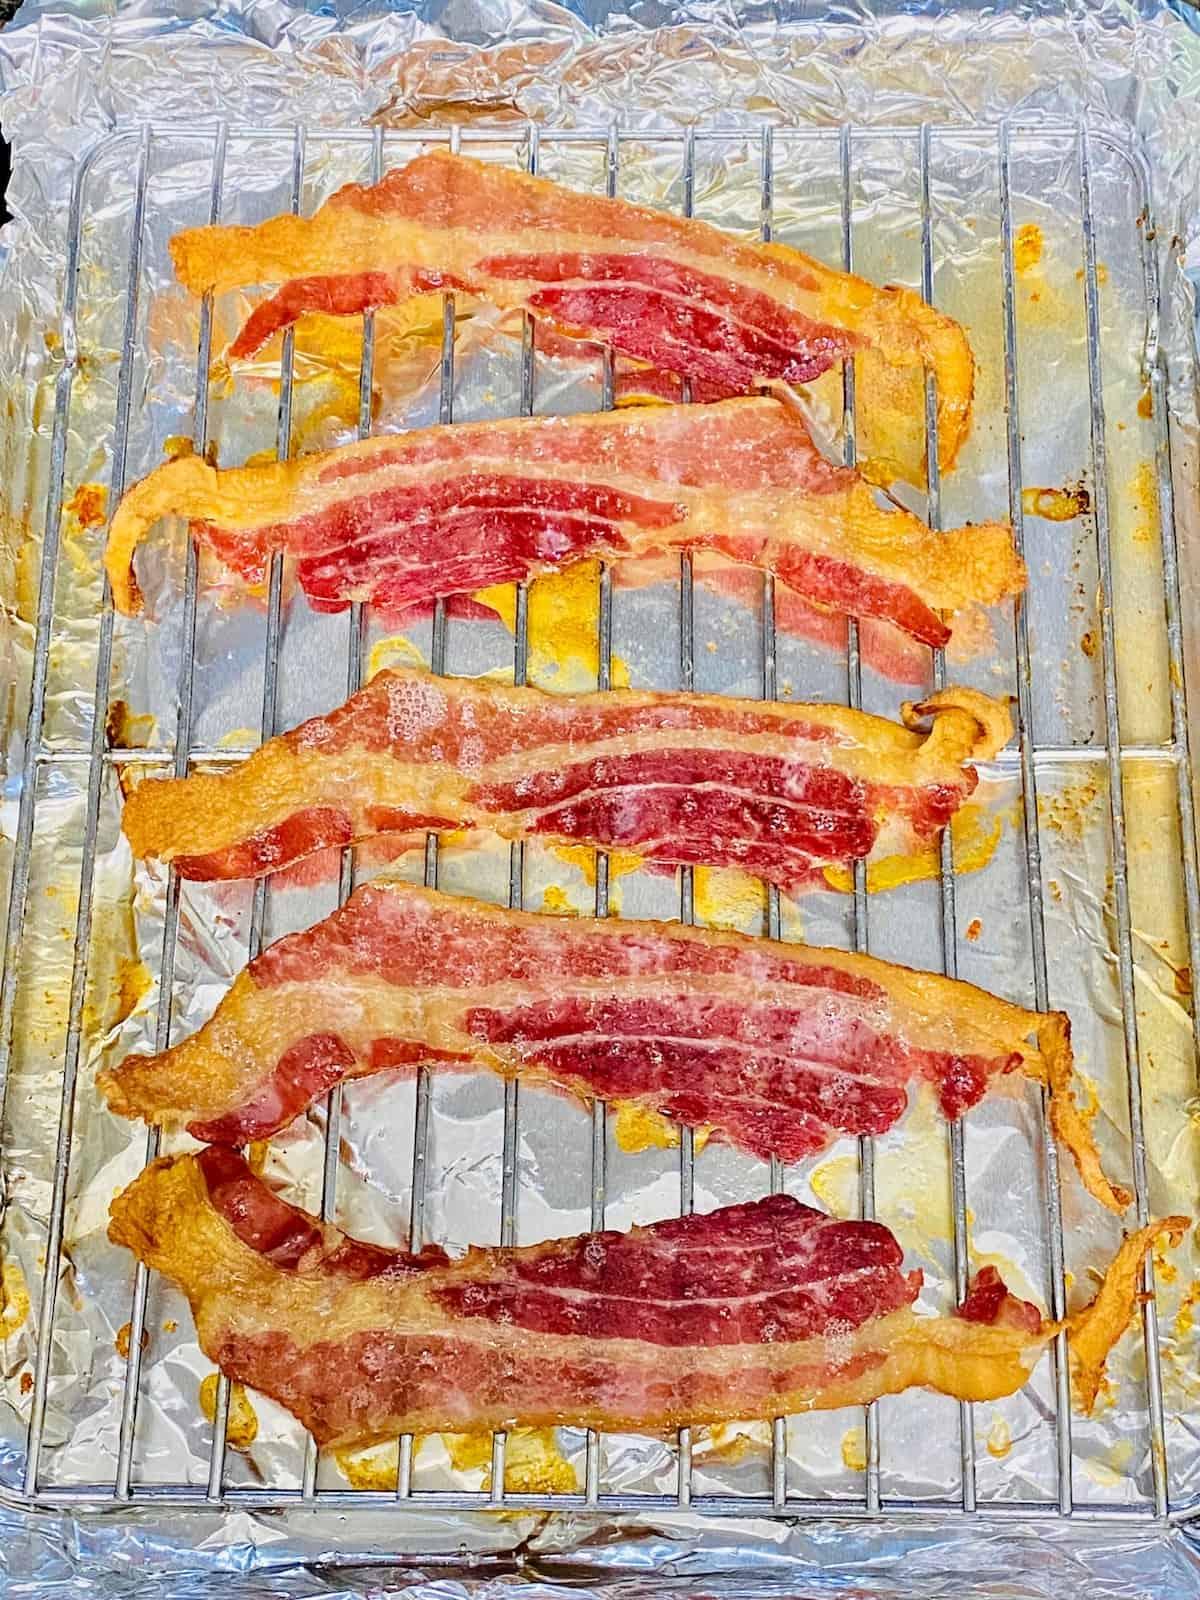 Bacon cooked 12 minutes